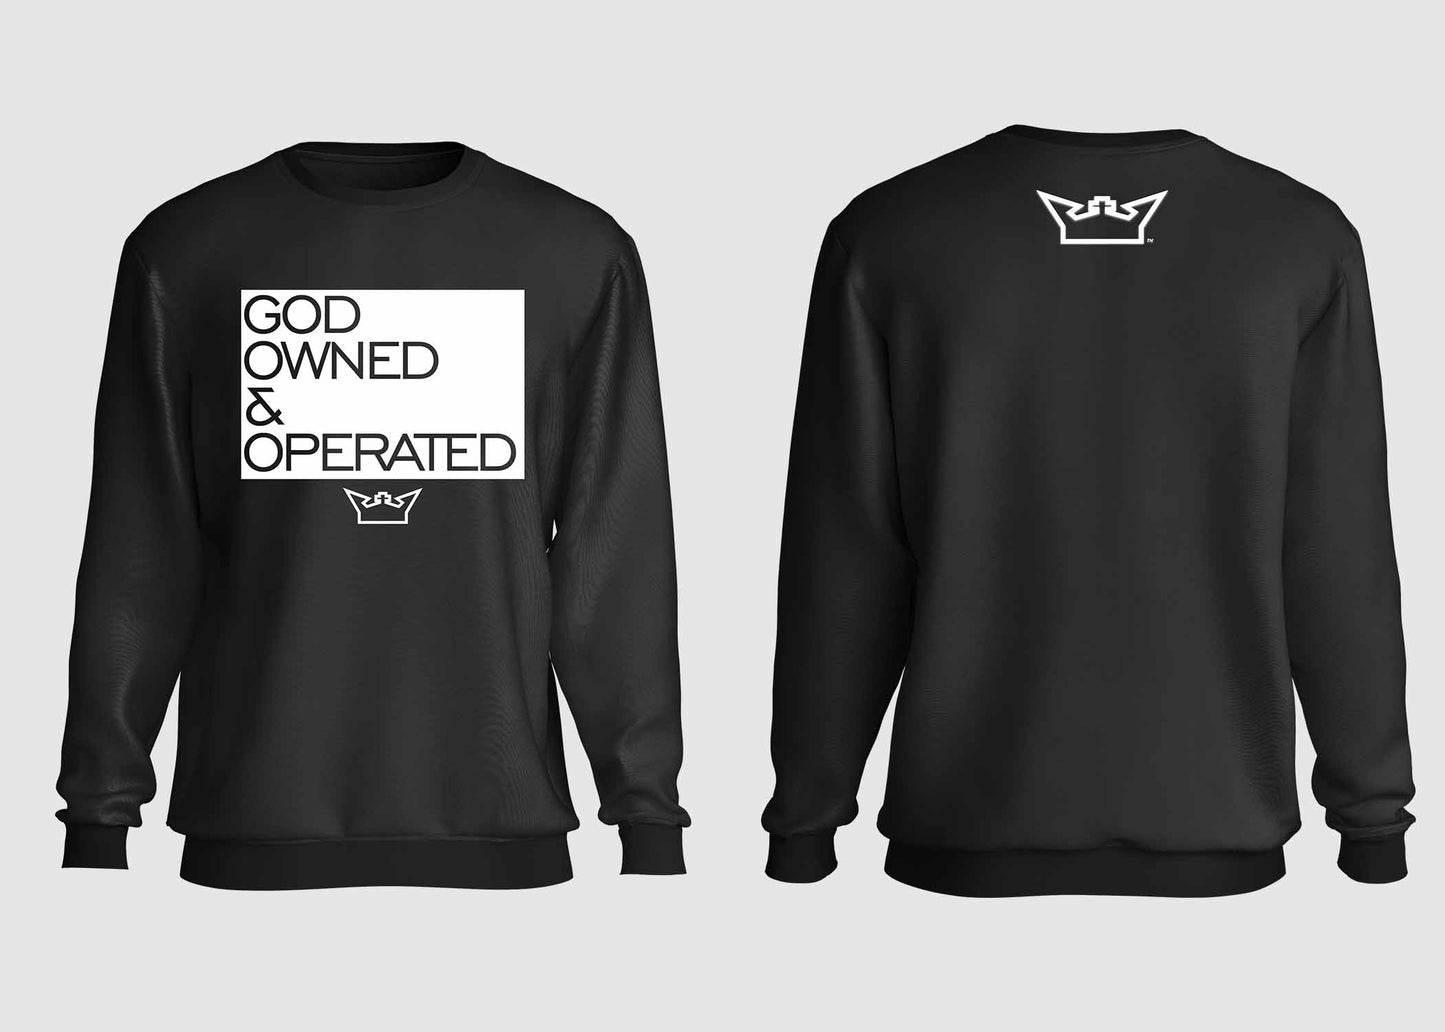 GOD OWNED & OPERATED CREWNECK